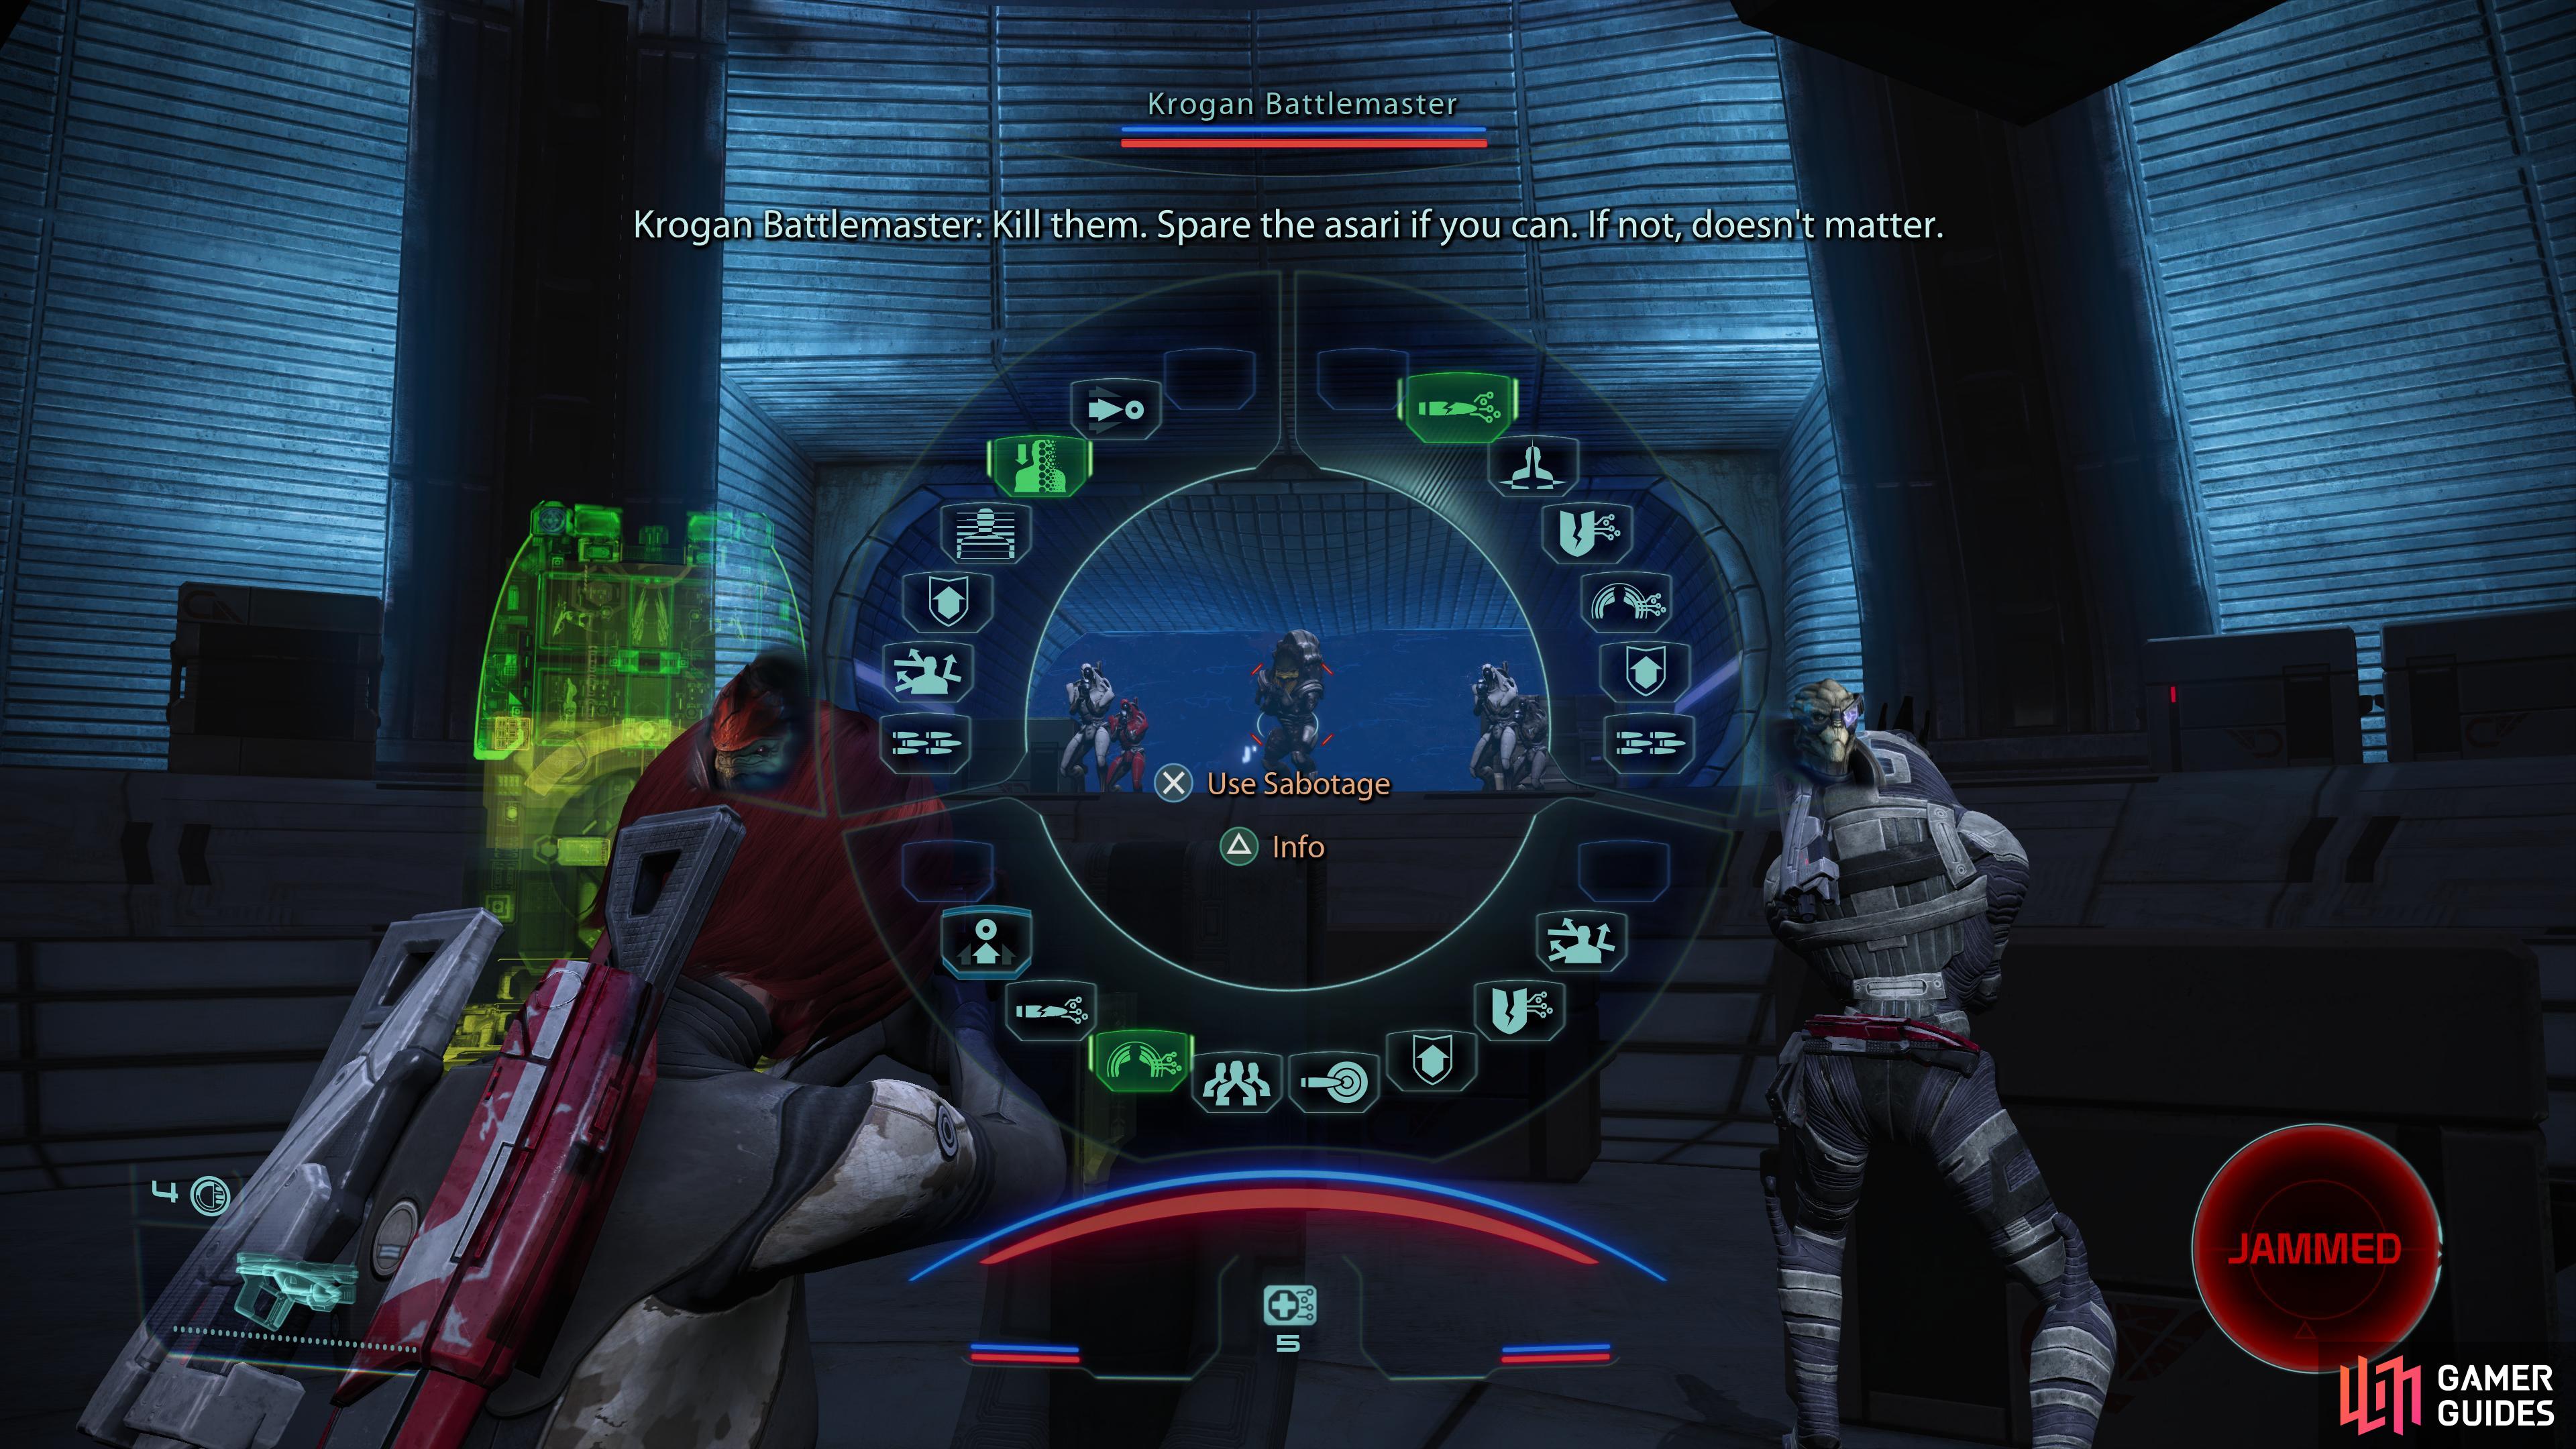 Immediately start out the fight by targeting the Krogan Battlemaster,